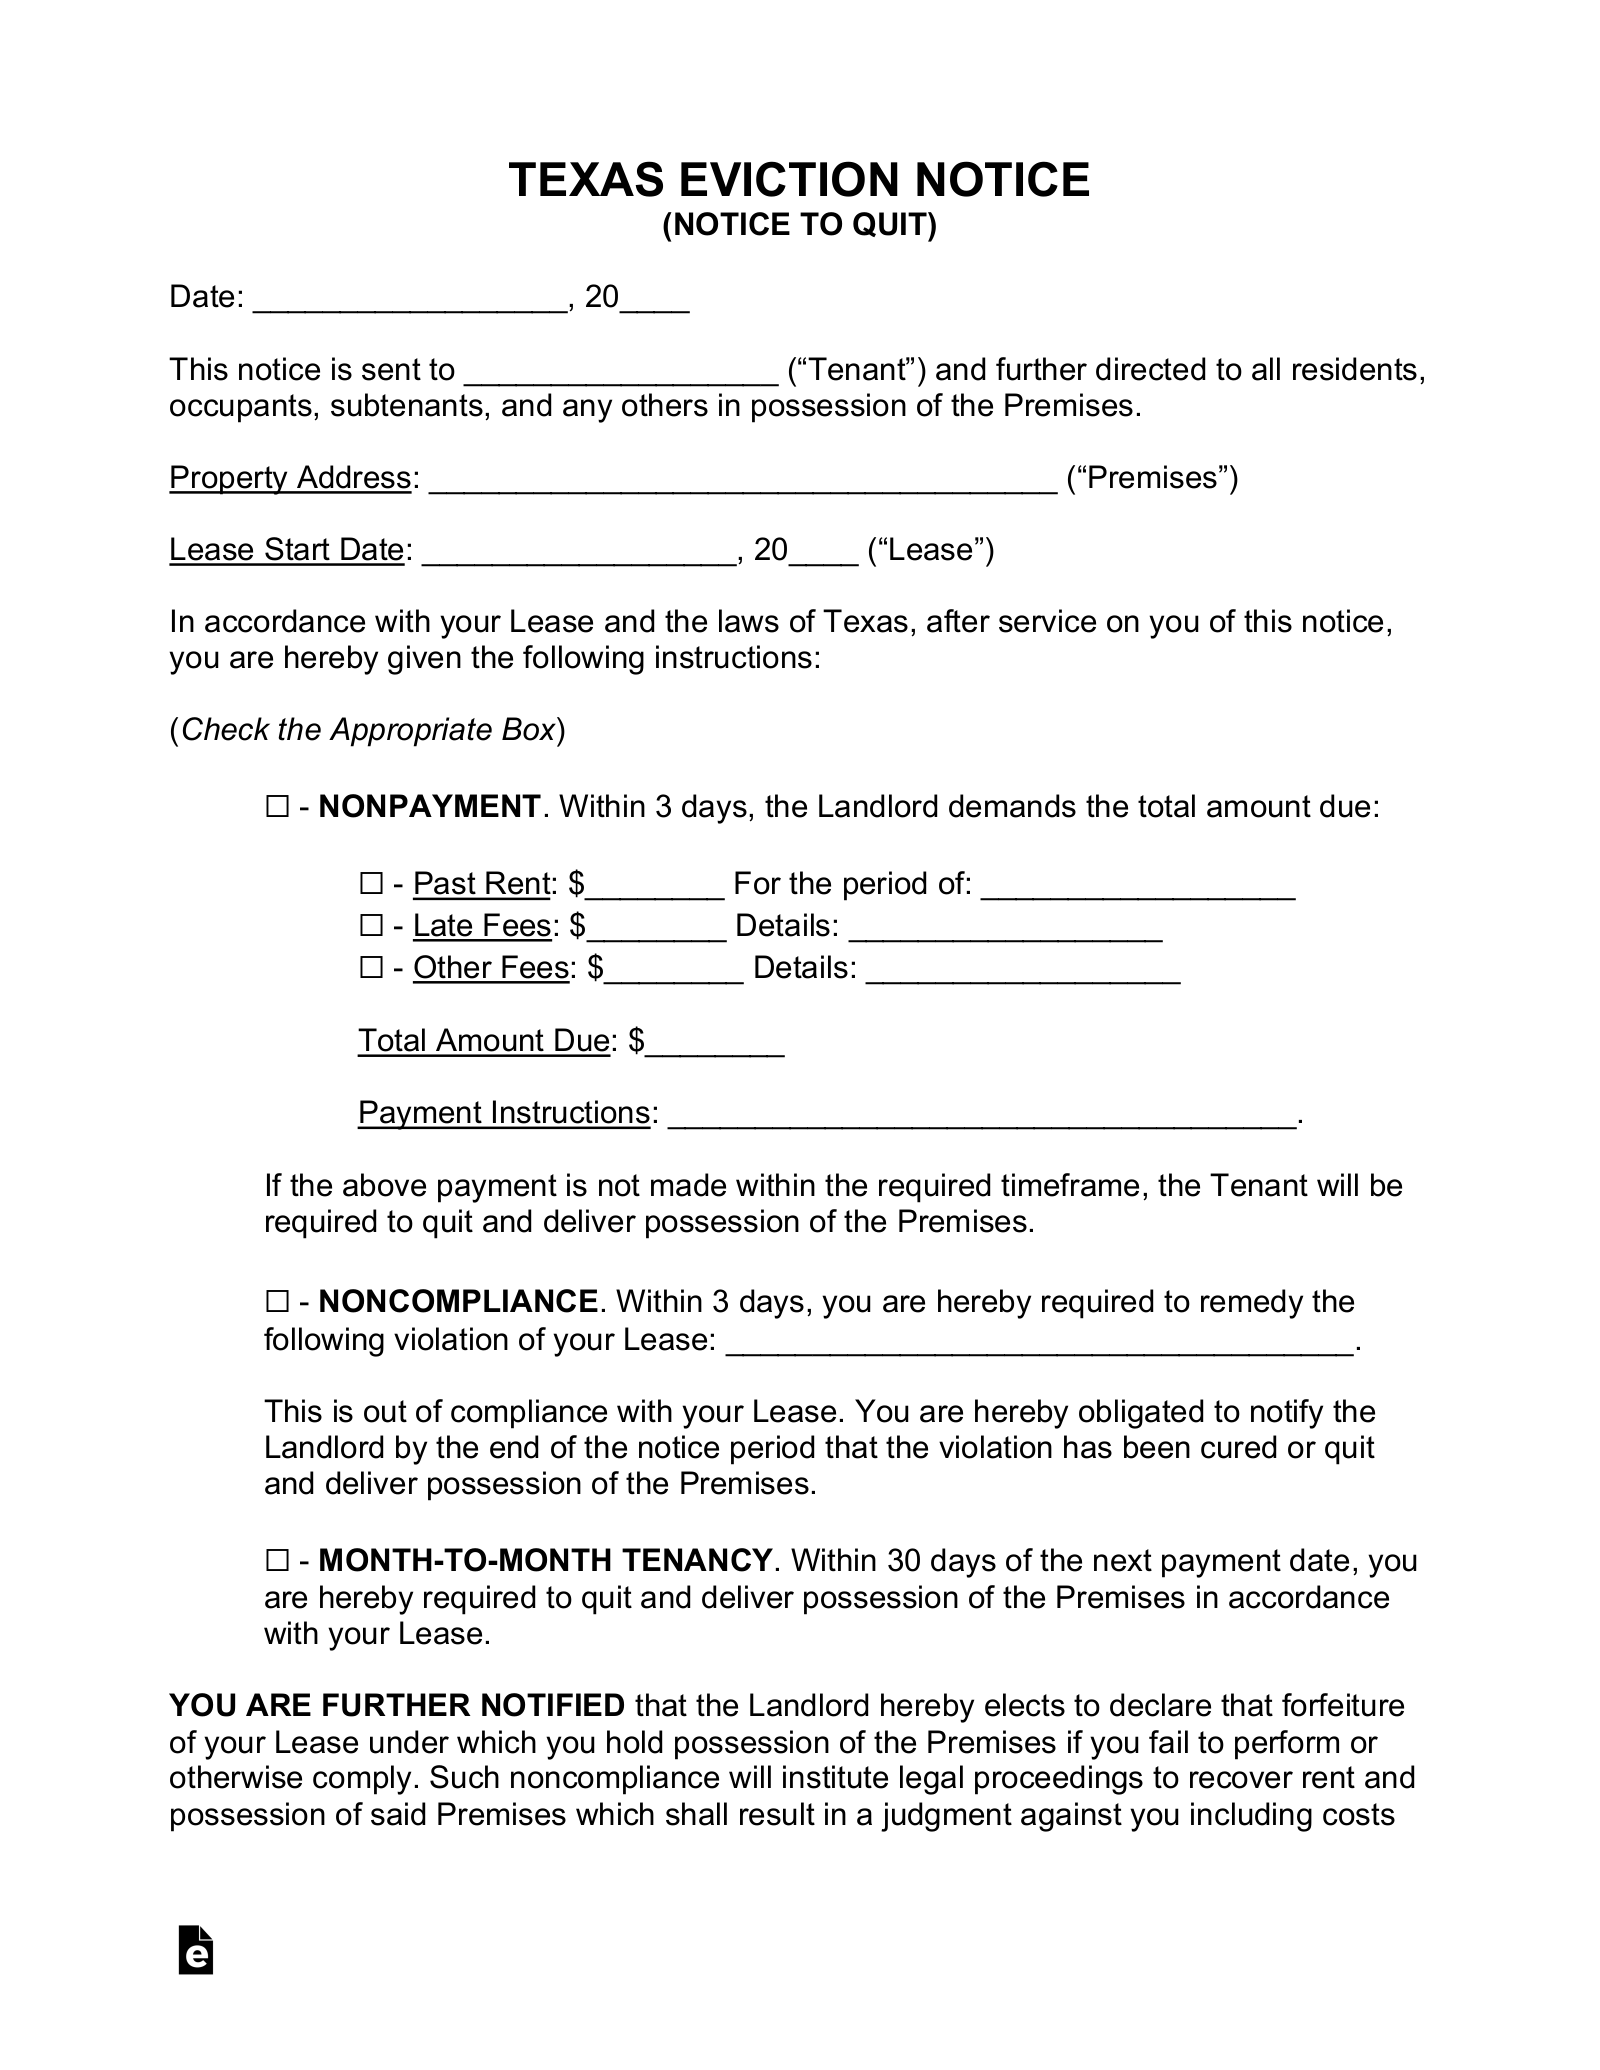 Texas Eviction Notice Forms (3)